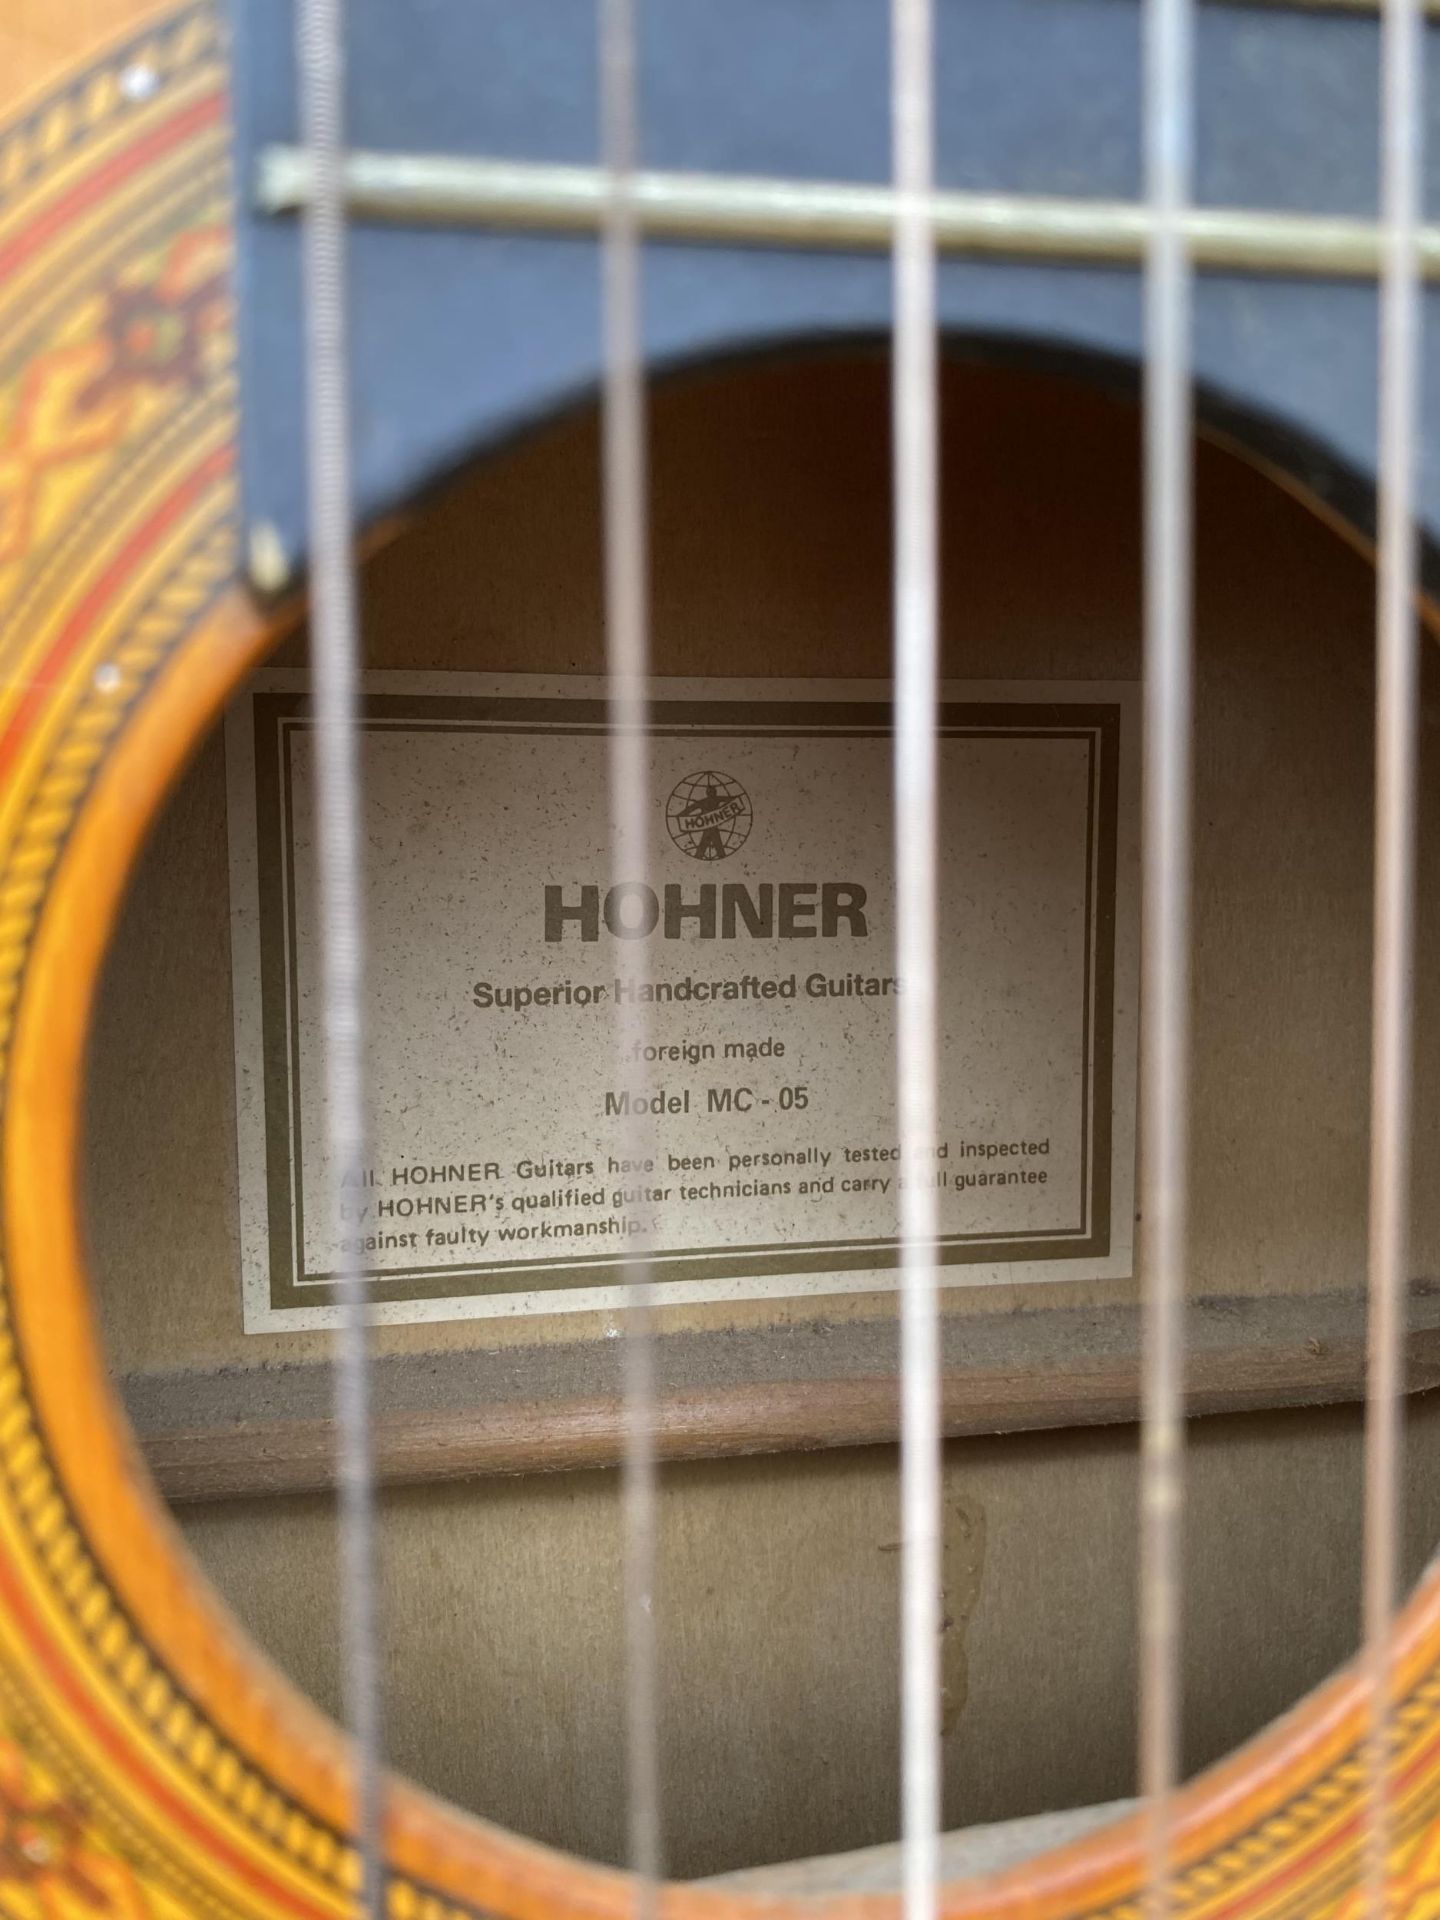 A HOHNER MODELMC-05 ACOUSTIC GUITAR - Image 2 of 2